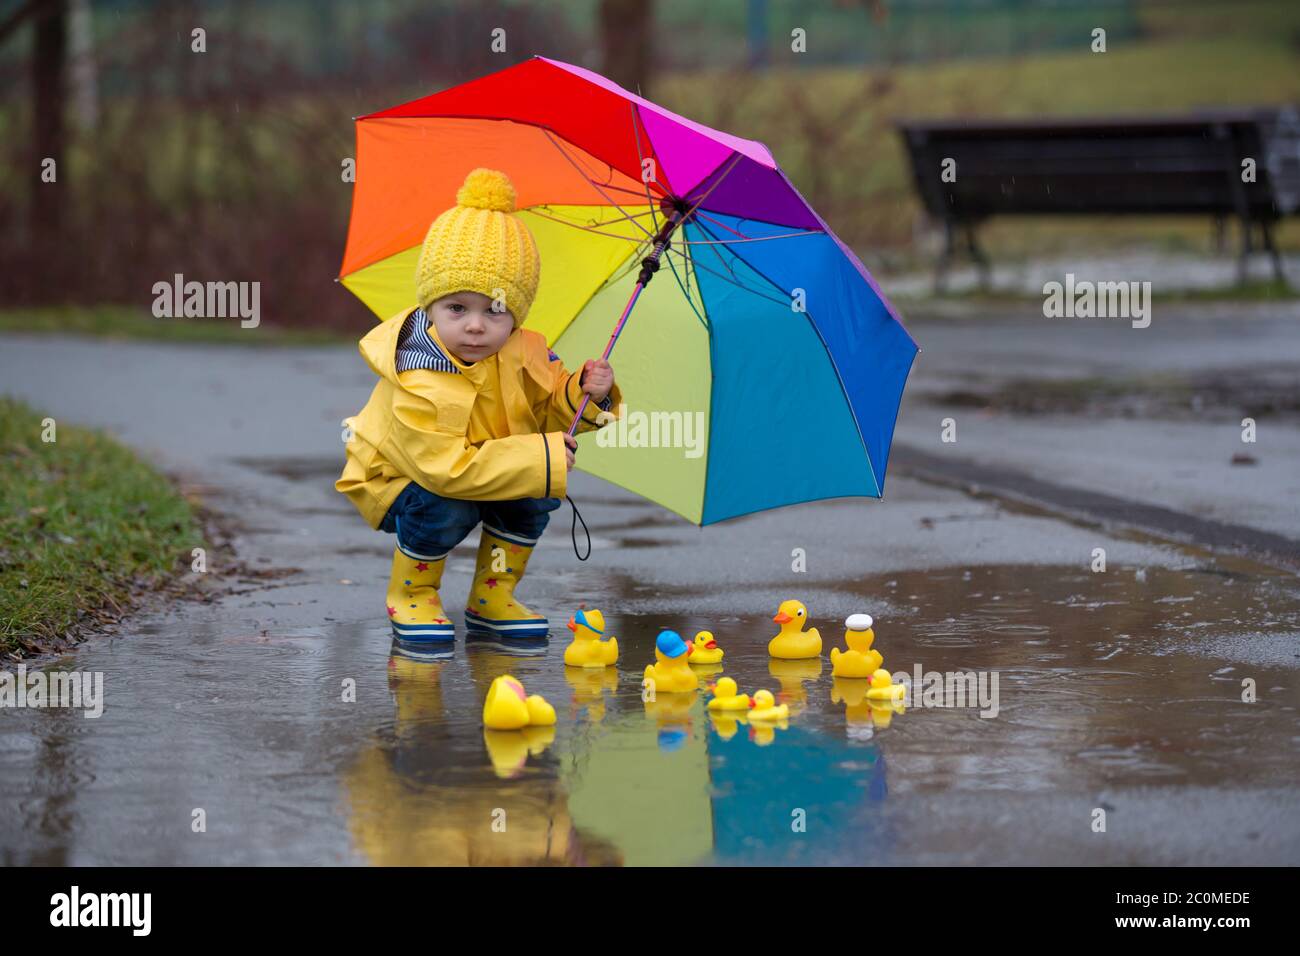 Beautiful funny blonde toddler boy with rubber ducks and colorful umbrella, jumping in puddles and playing in the rain, wintertime Stock Photo